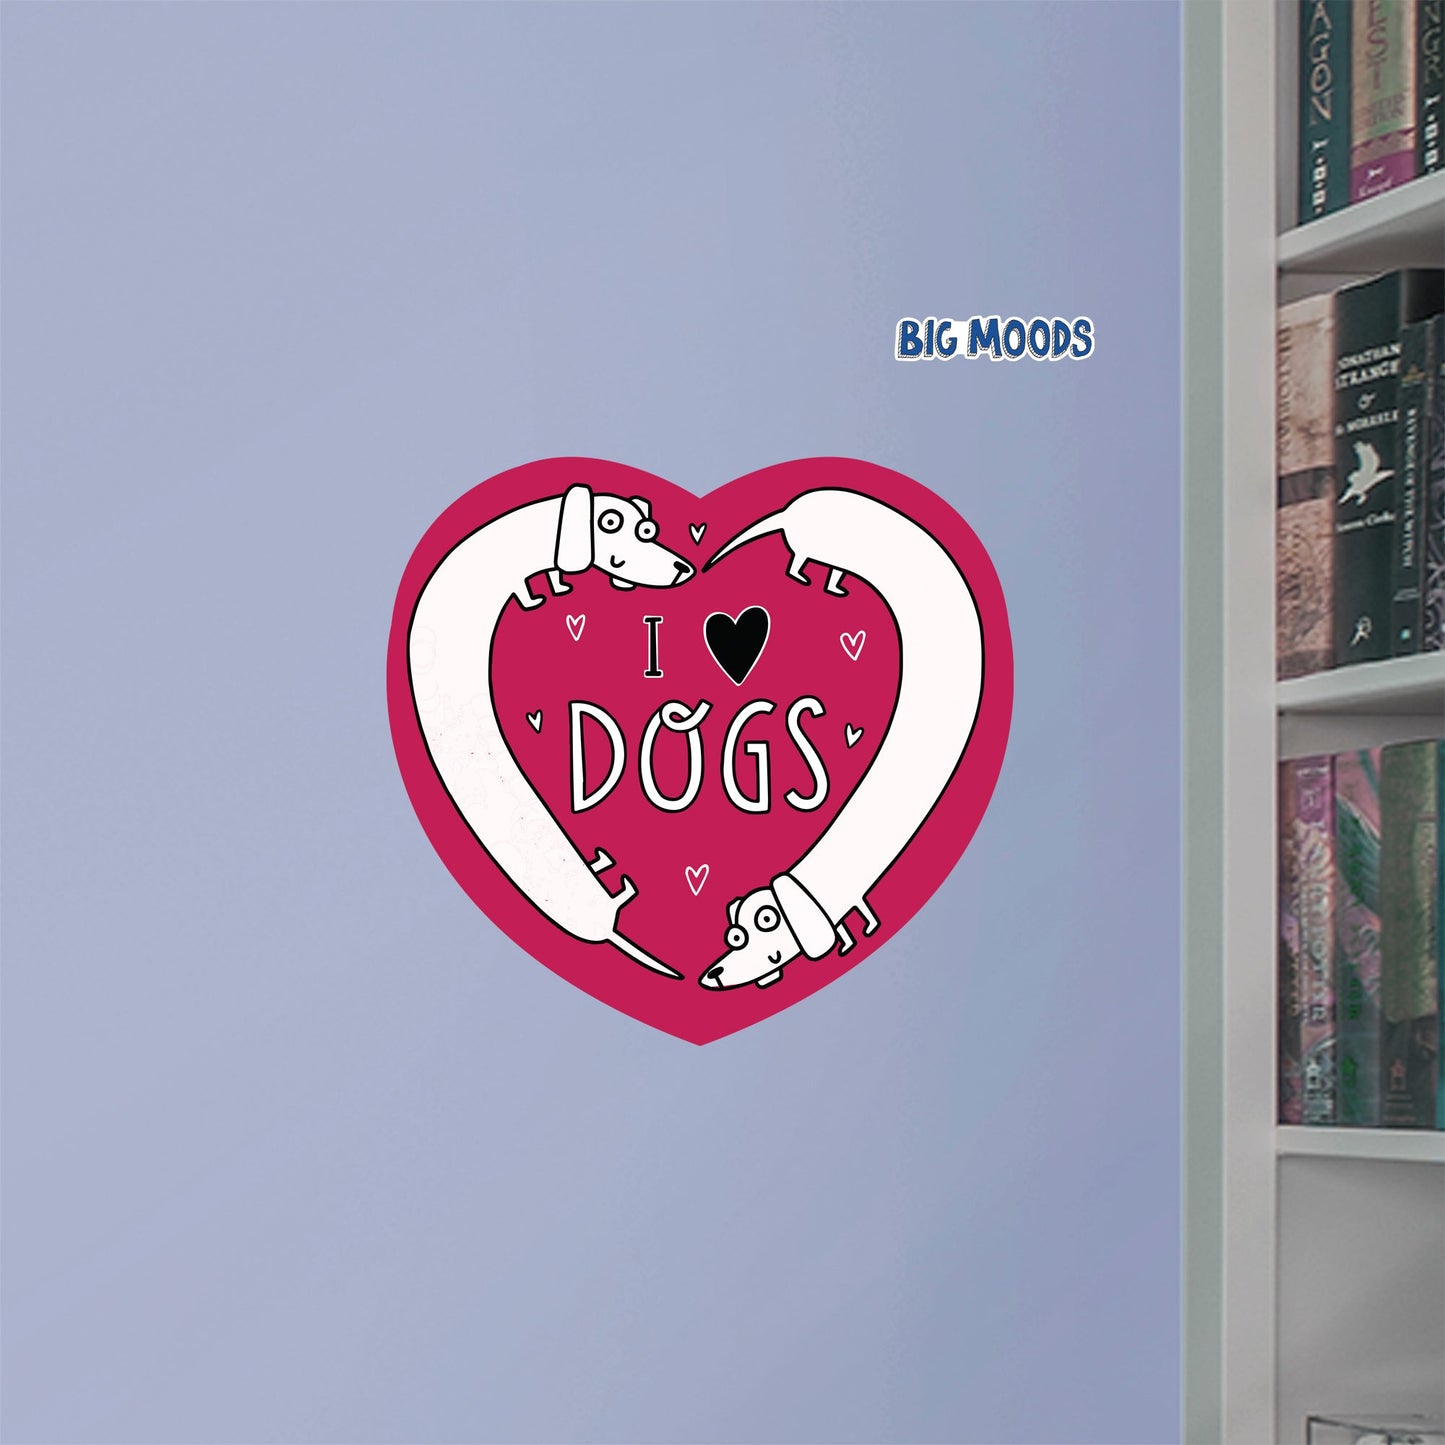 I LOVE DOGS        - Officially Licensed Big Moods Removable     Adhesive Decal